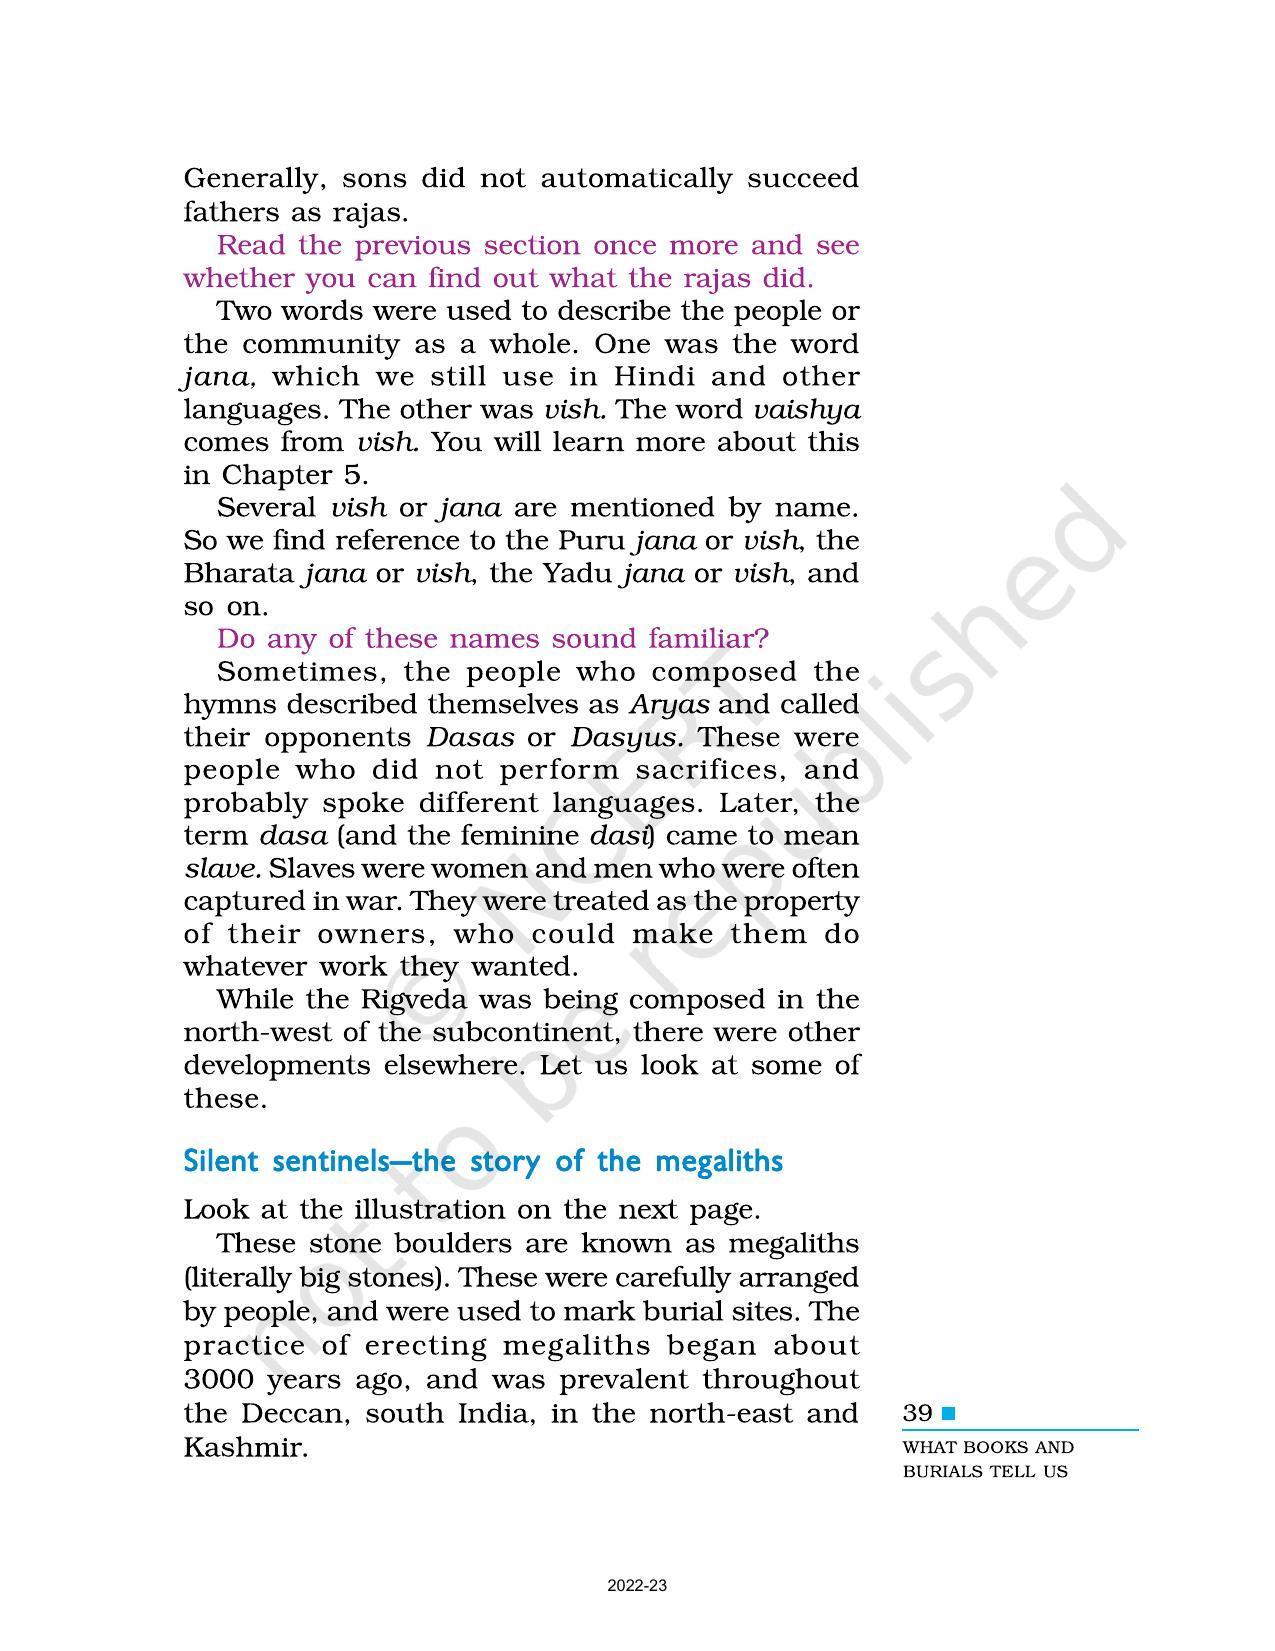 NCERT Book for Class 6 Social Science(History) : Chapter 4-What Books and Burials Tell Us - Page 5